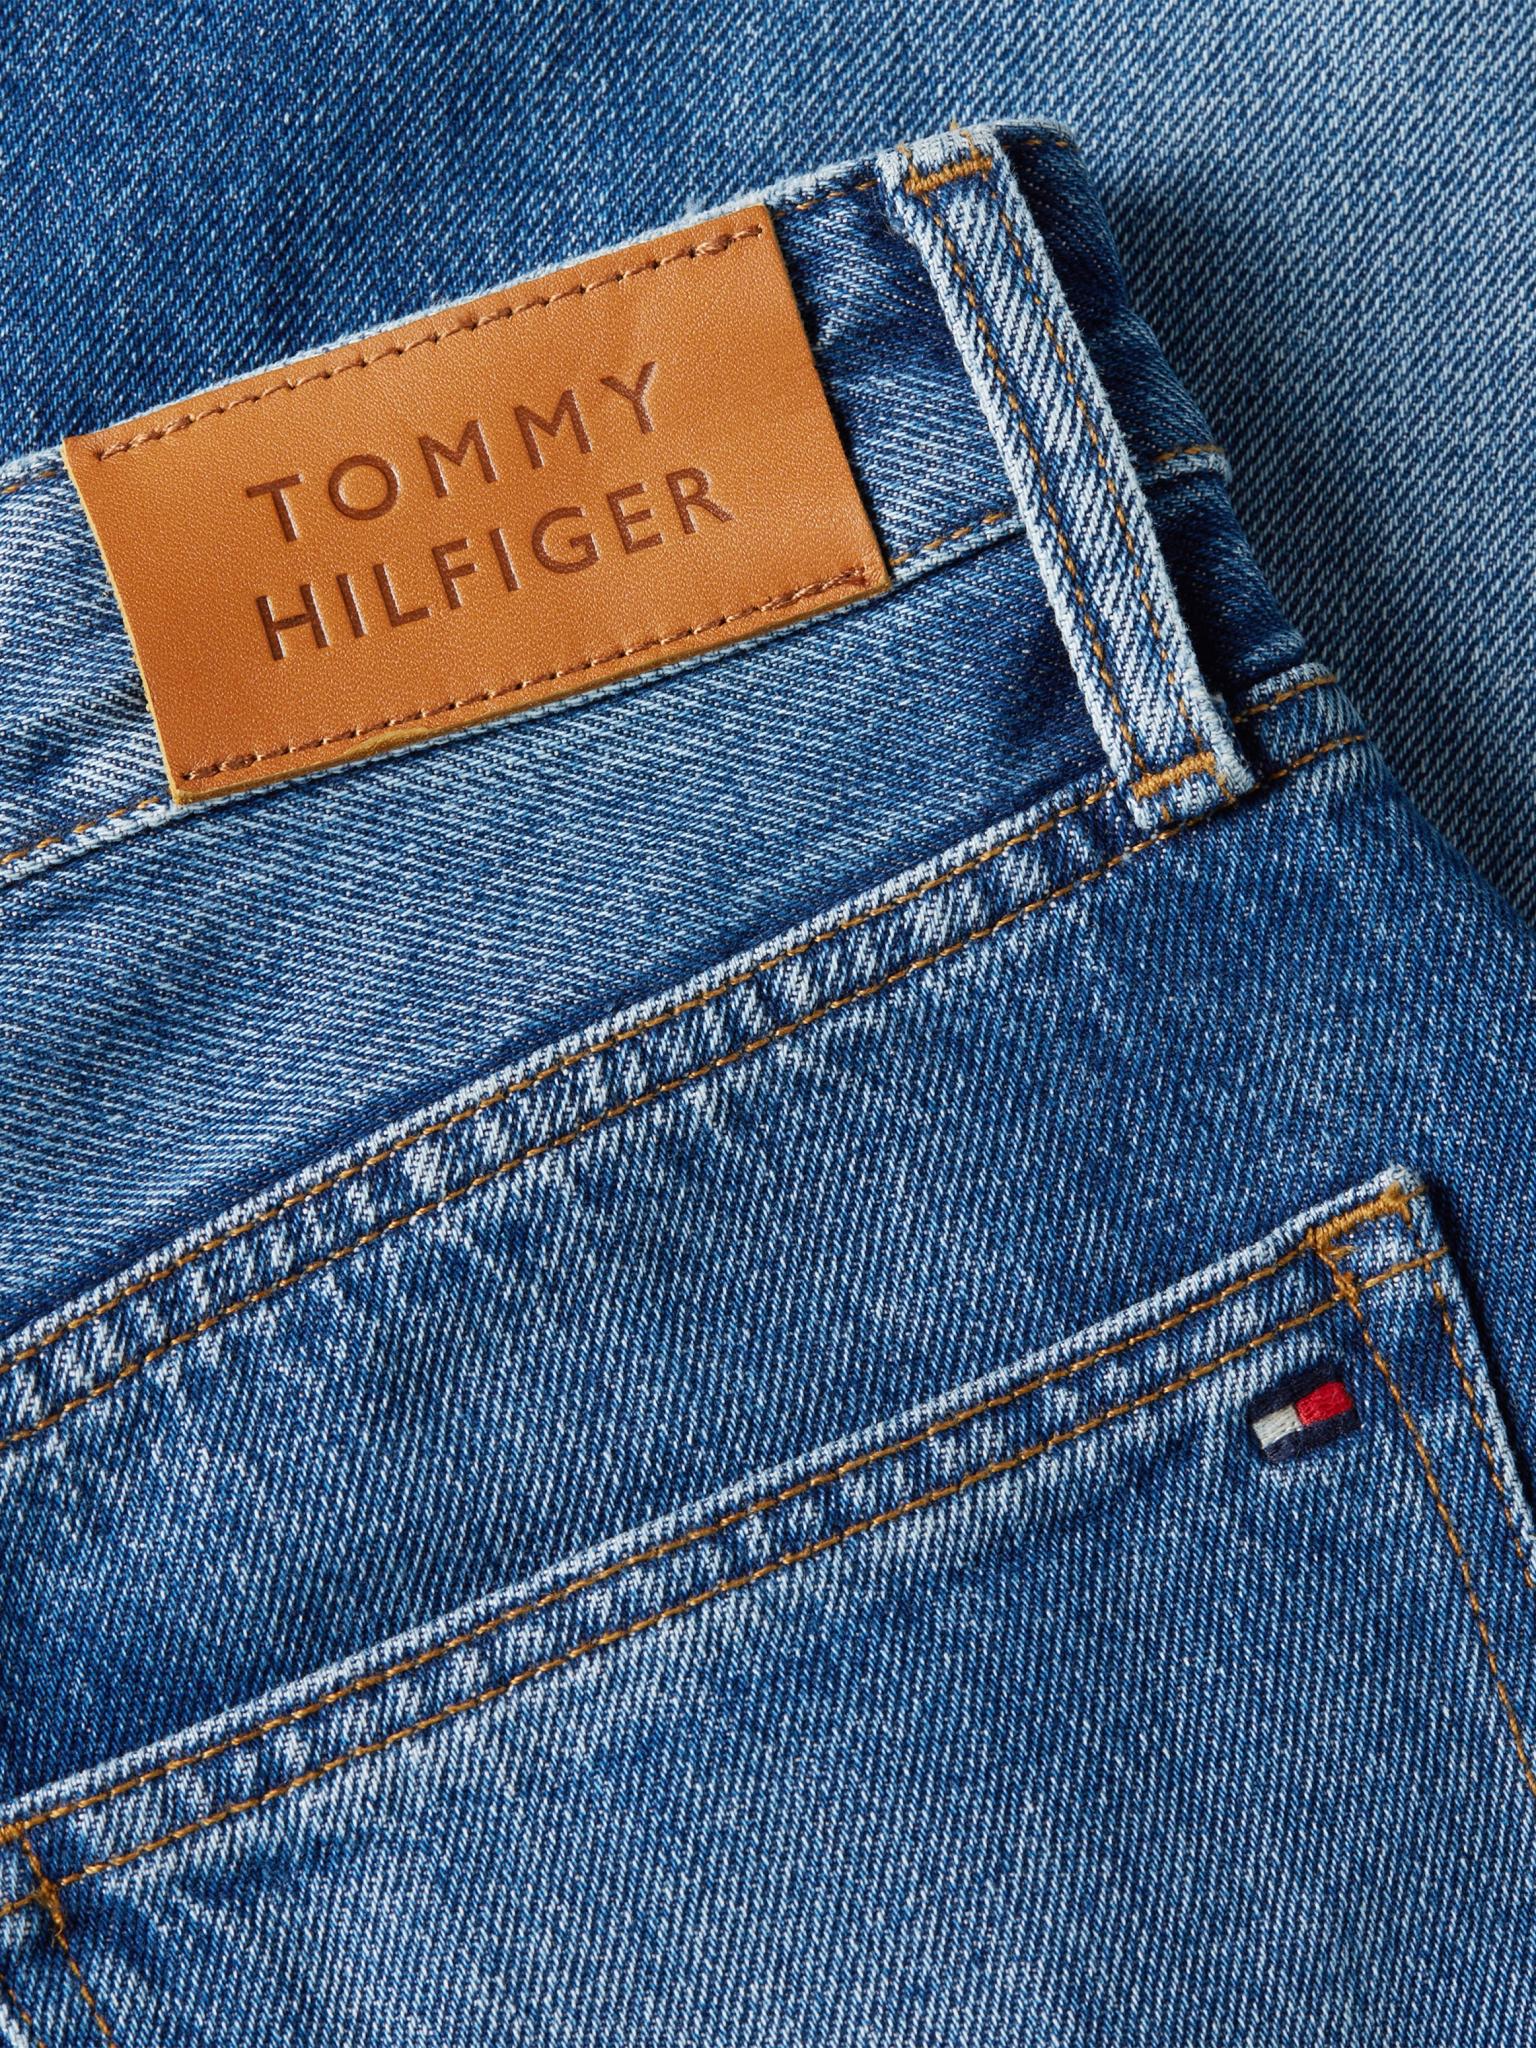 TOMMY HILFIGER Jeans BALLOON HW A PATY 10675470